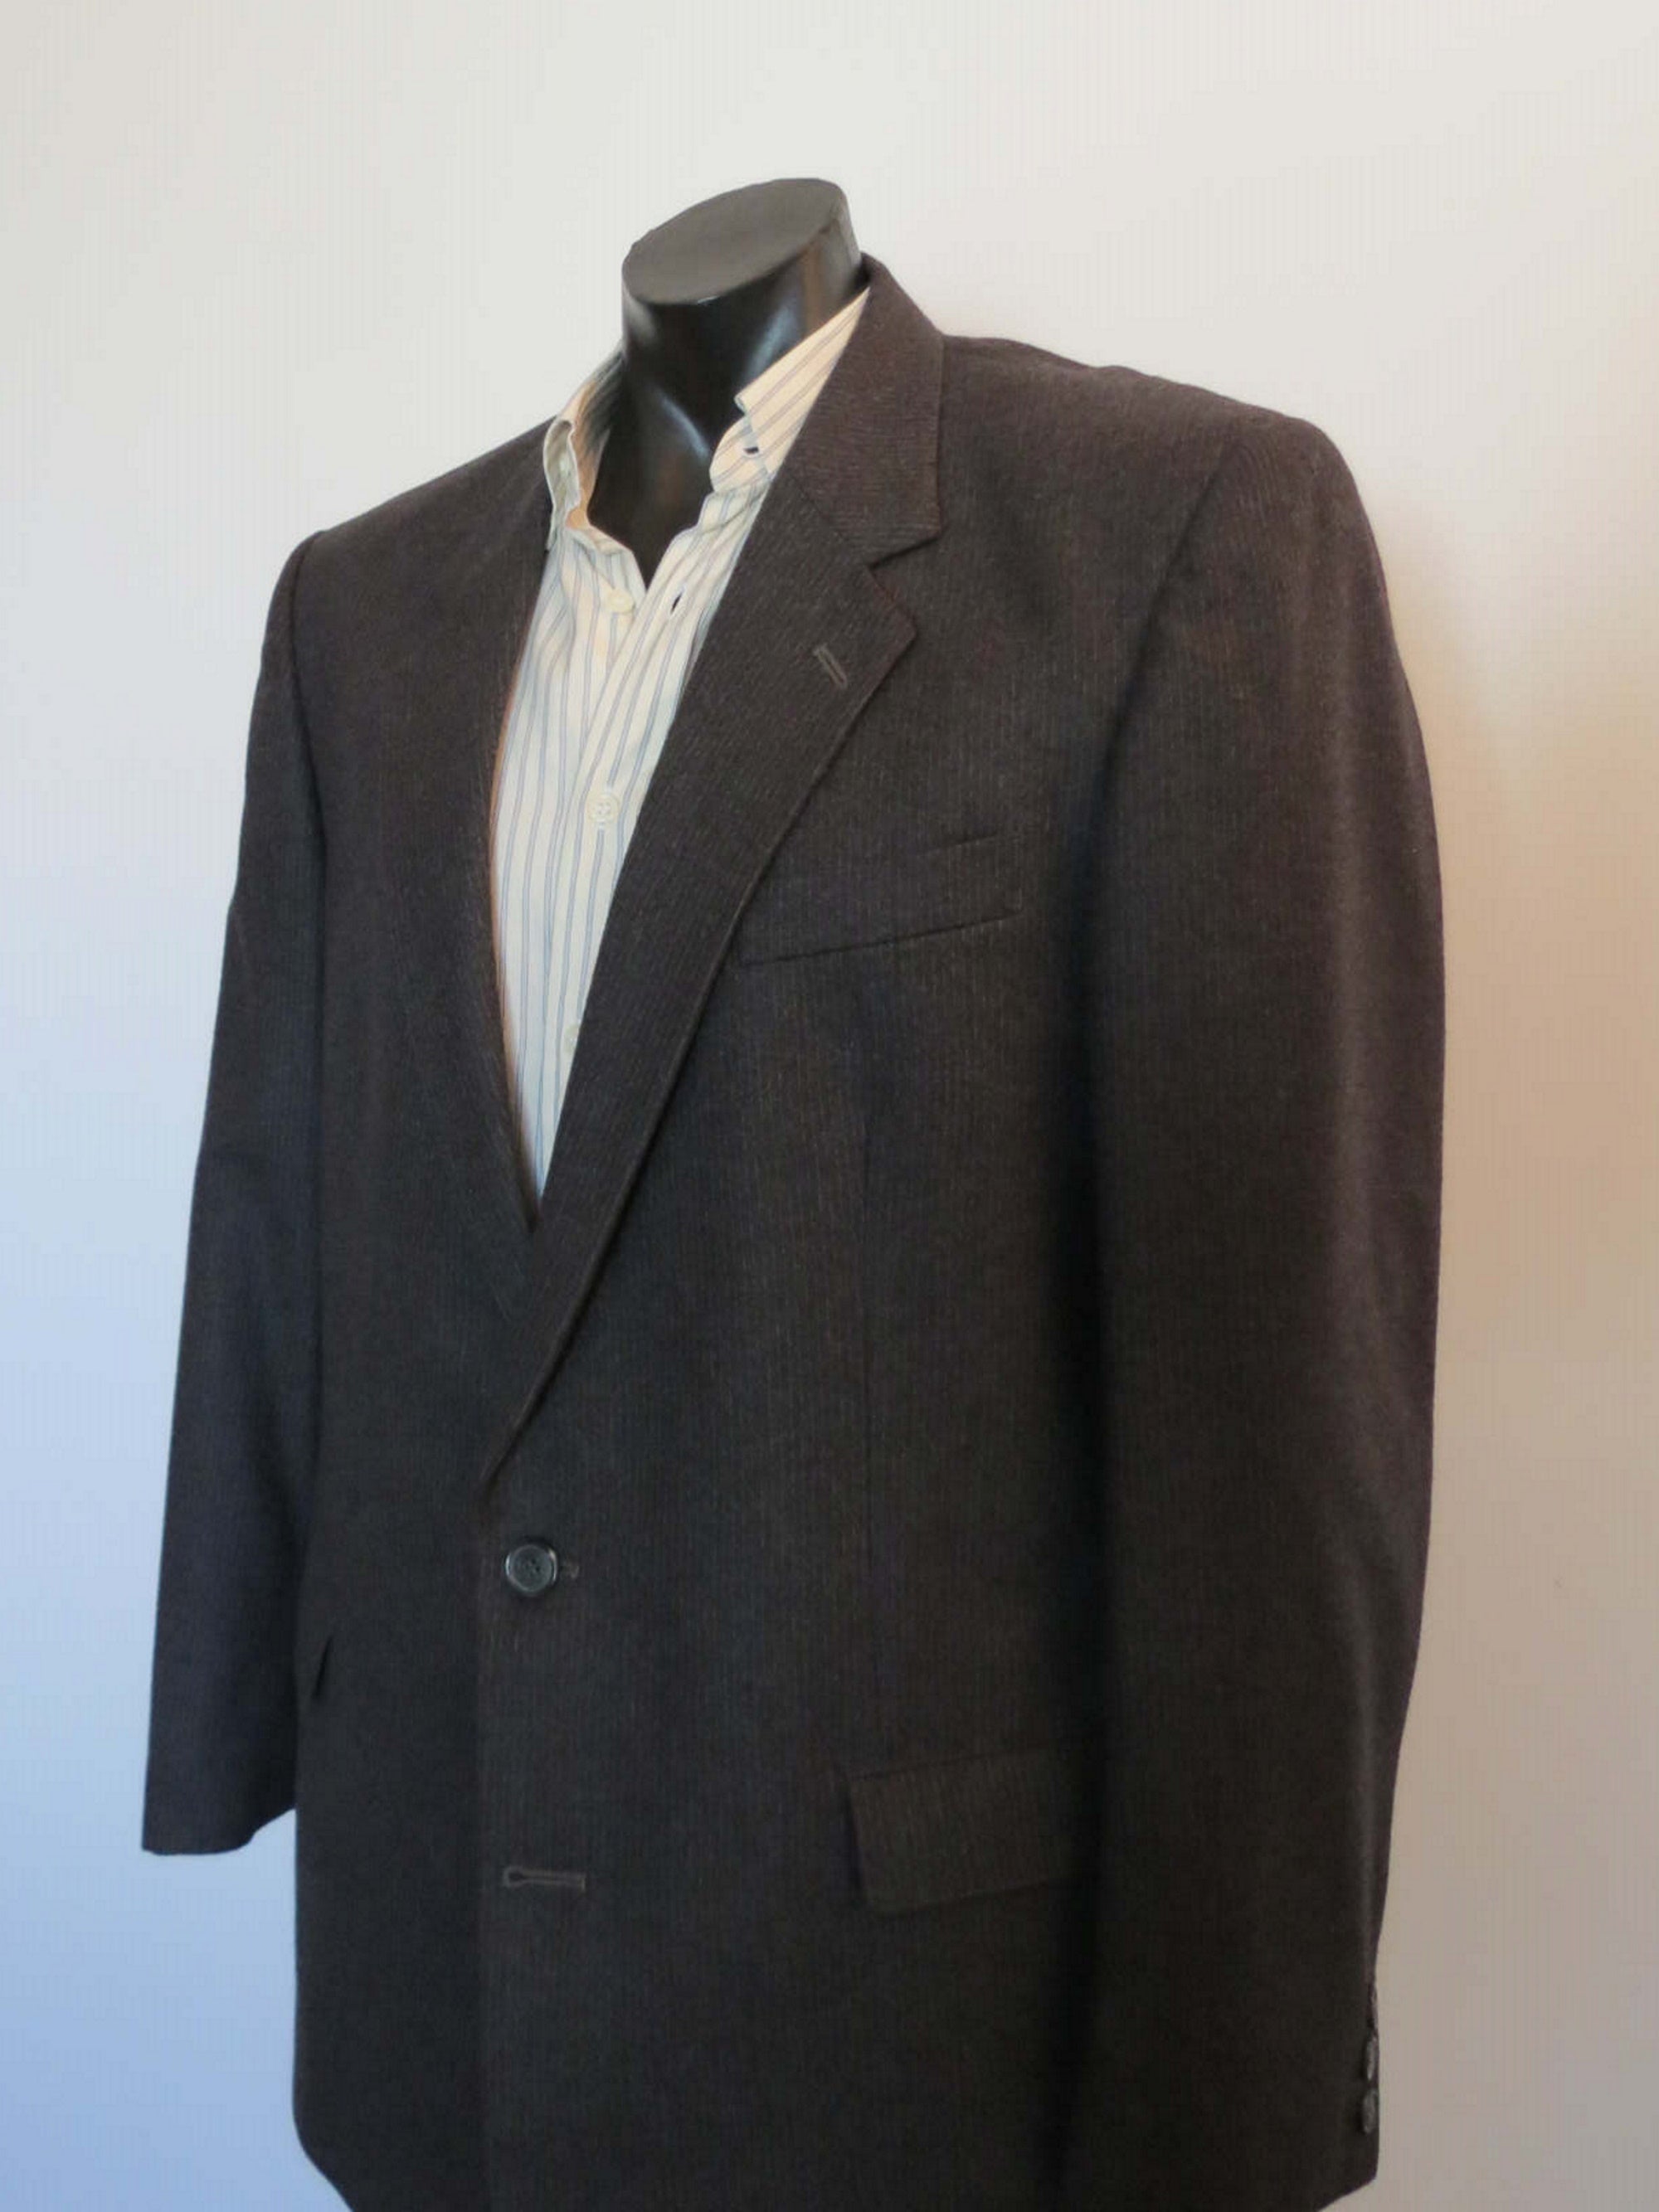 1980s 1990s vintage retro charcoal grey pinstriped wool jacket by tres bon